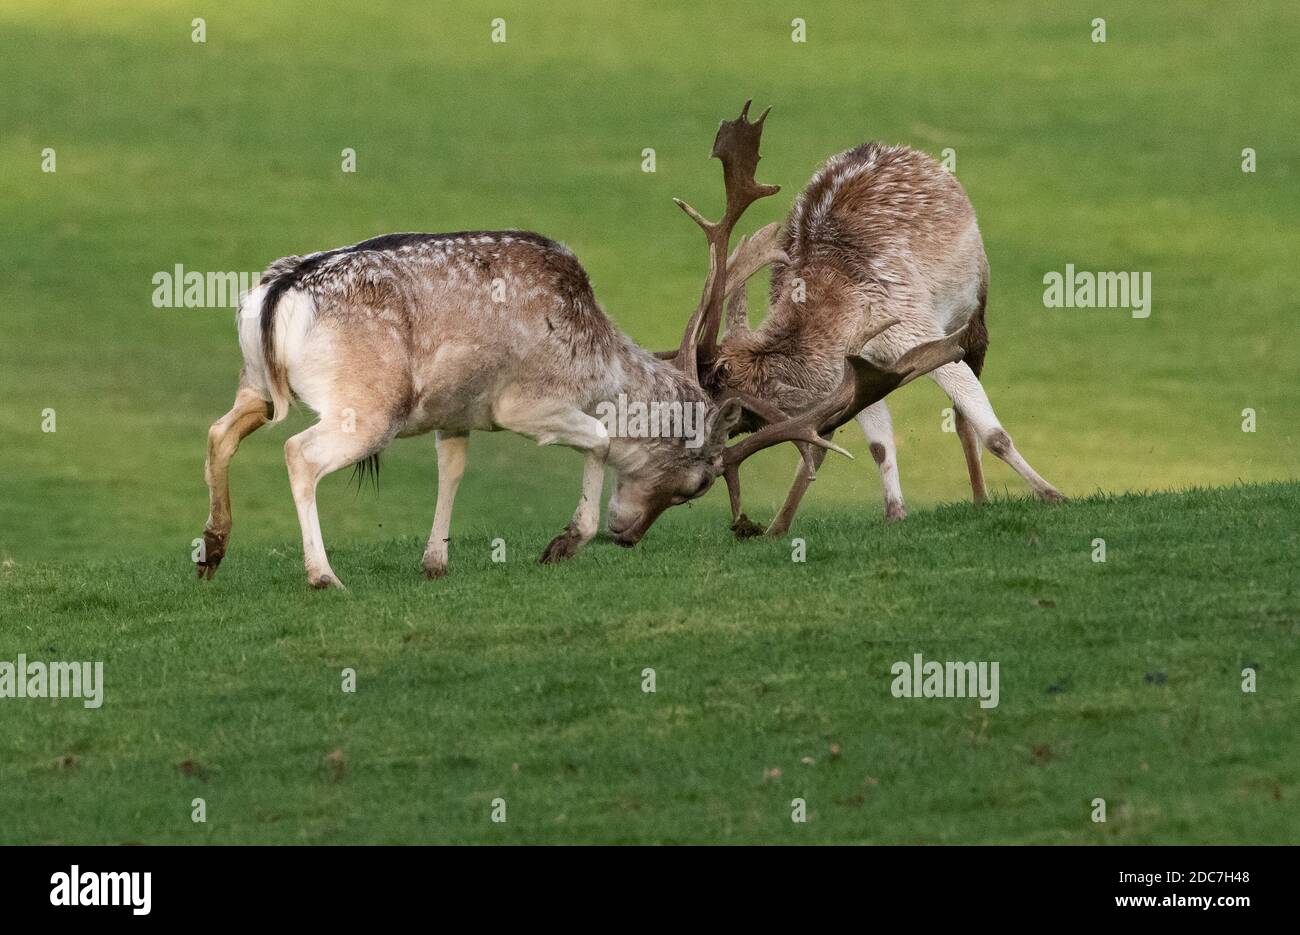 Milnthorpe, Cumbria, UK. 19th Nov, 2020. Fallow deer stags fighting in the evening sunshine during the rutting season at Milnthorpe, Cumbria. UK Credit: John Eveson/Alamy Live News Stock Photo